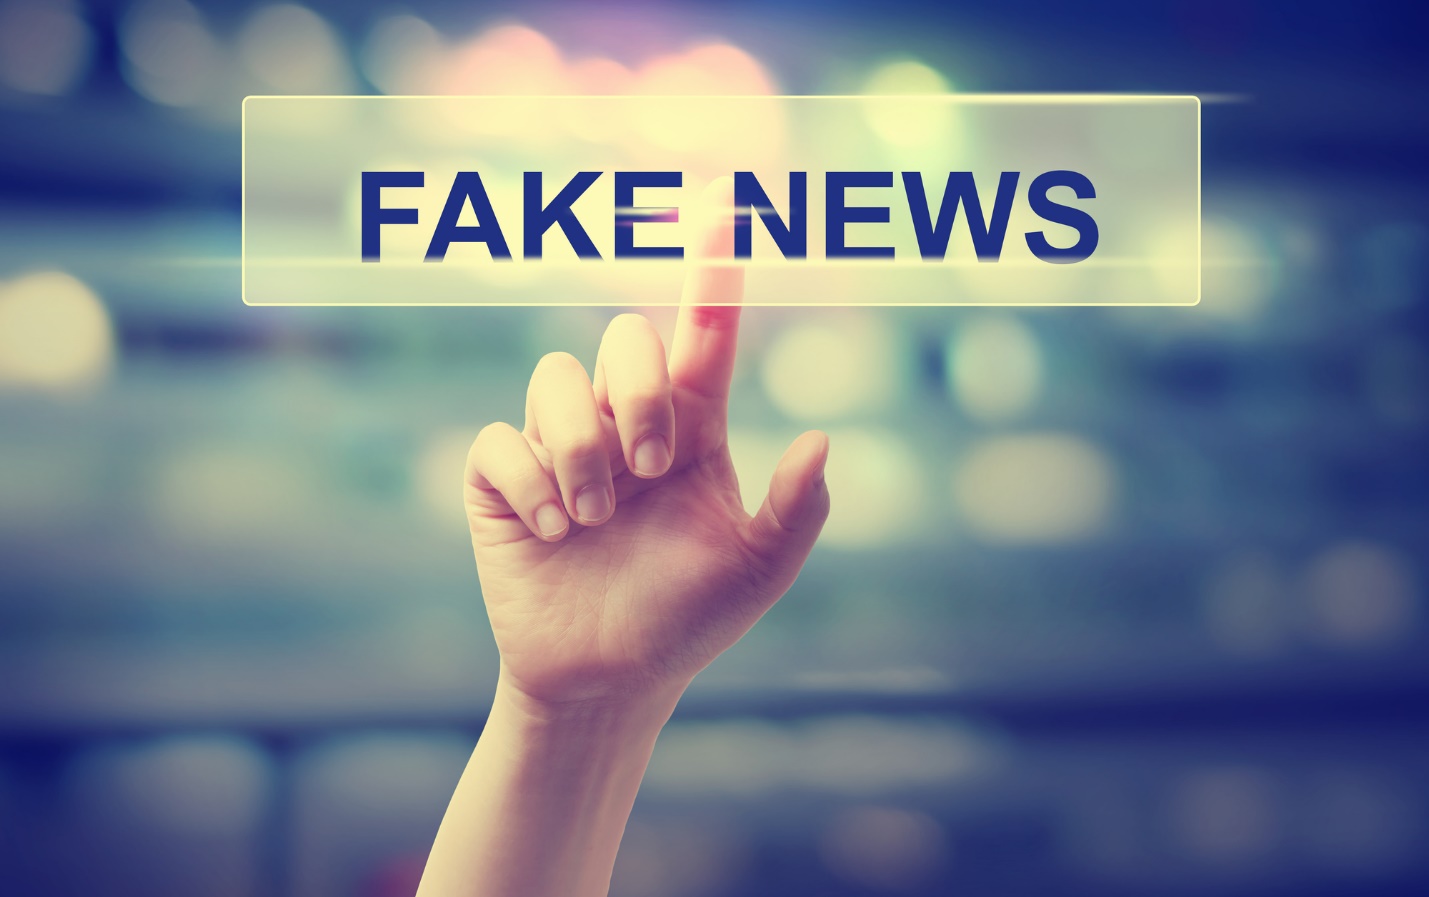 Incentivized methods will provide a more effective solution in tackling Fake News